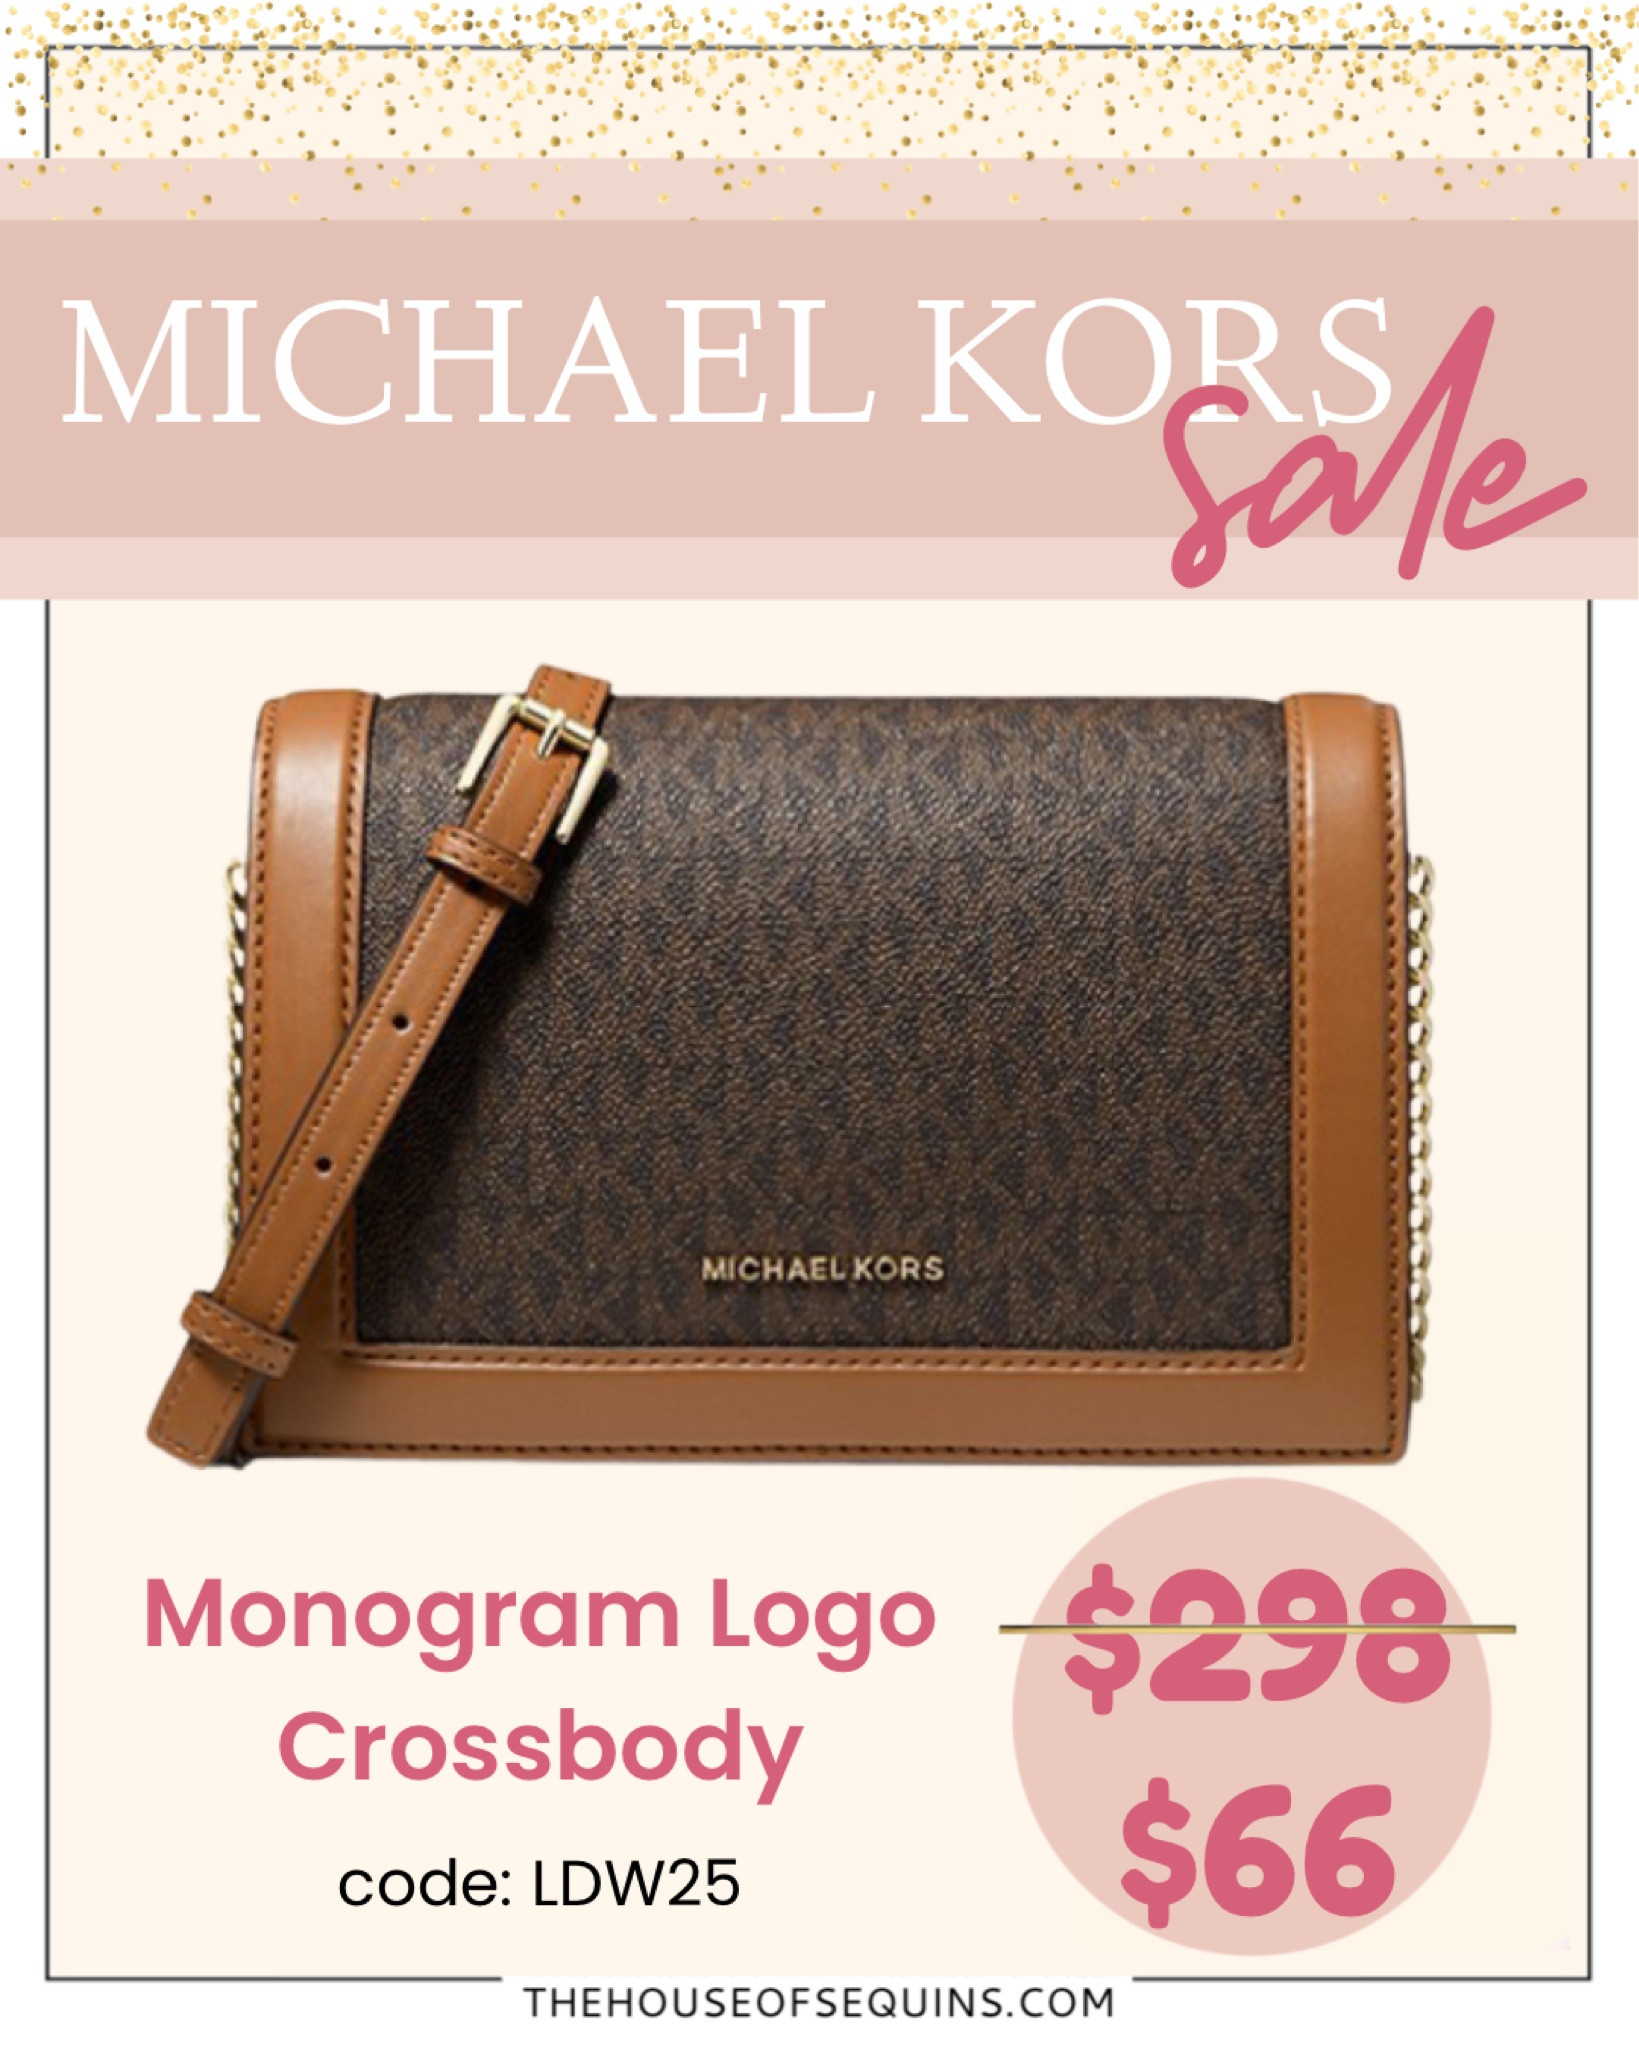 Michael Kors Suri Small Quilted Crossbody Bag Prices and Specs in